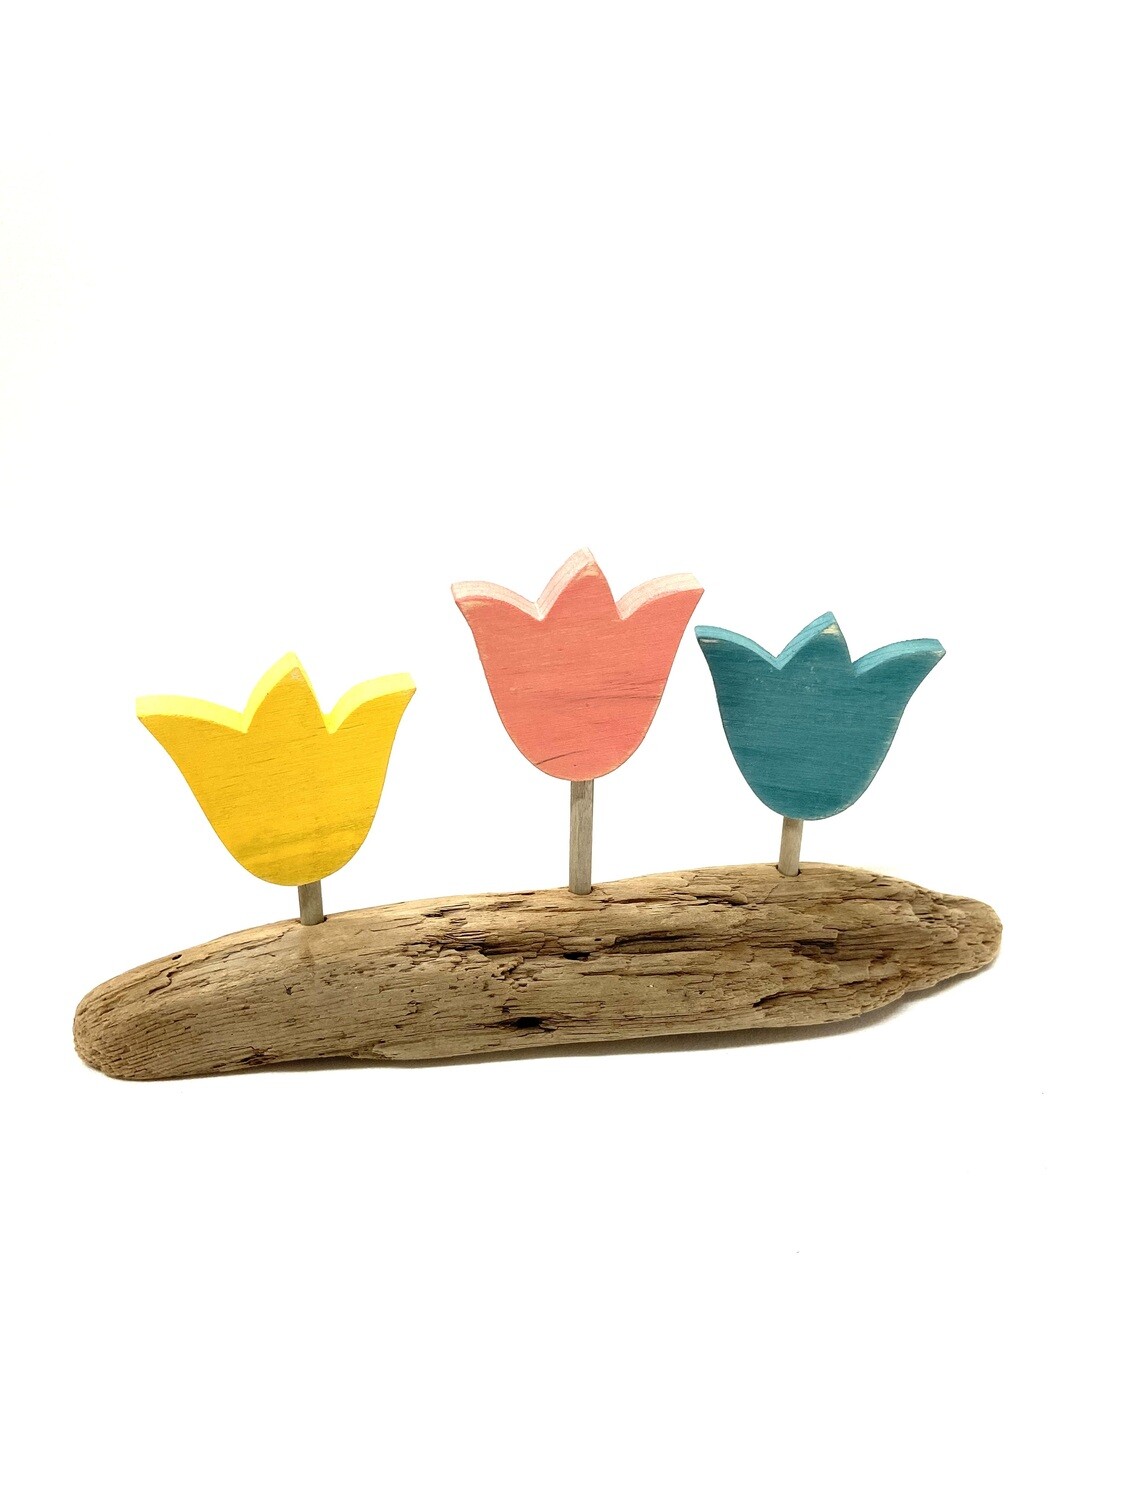 3 Tulips on Driftwood- Jerry Walsh 